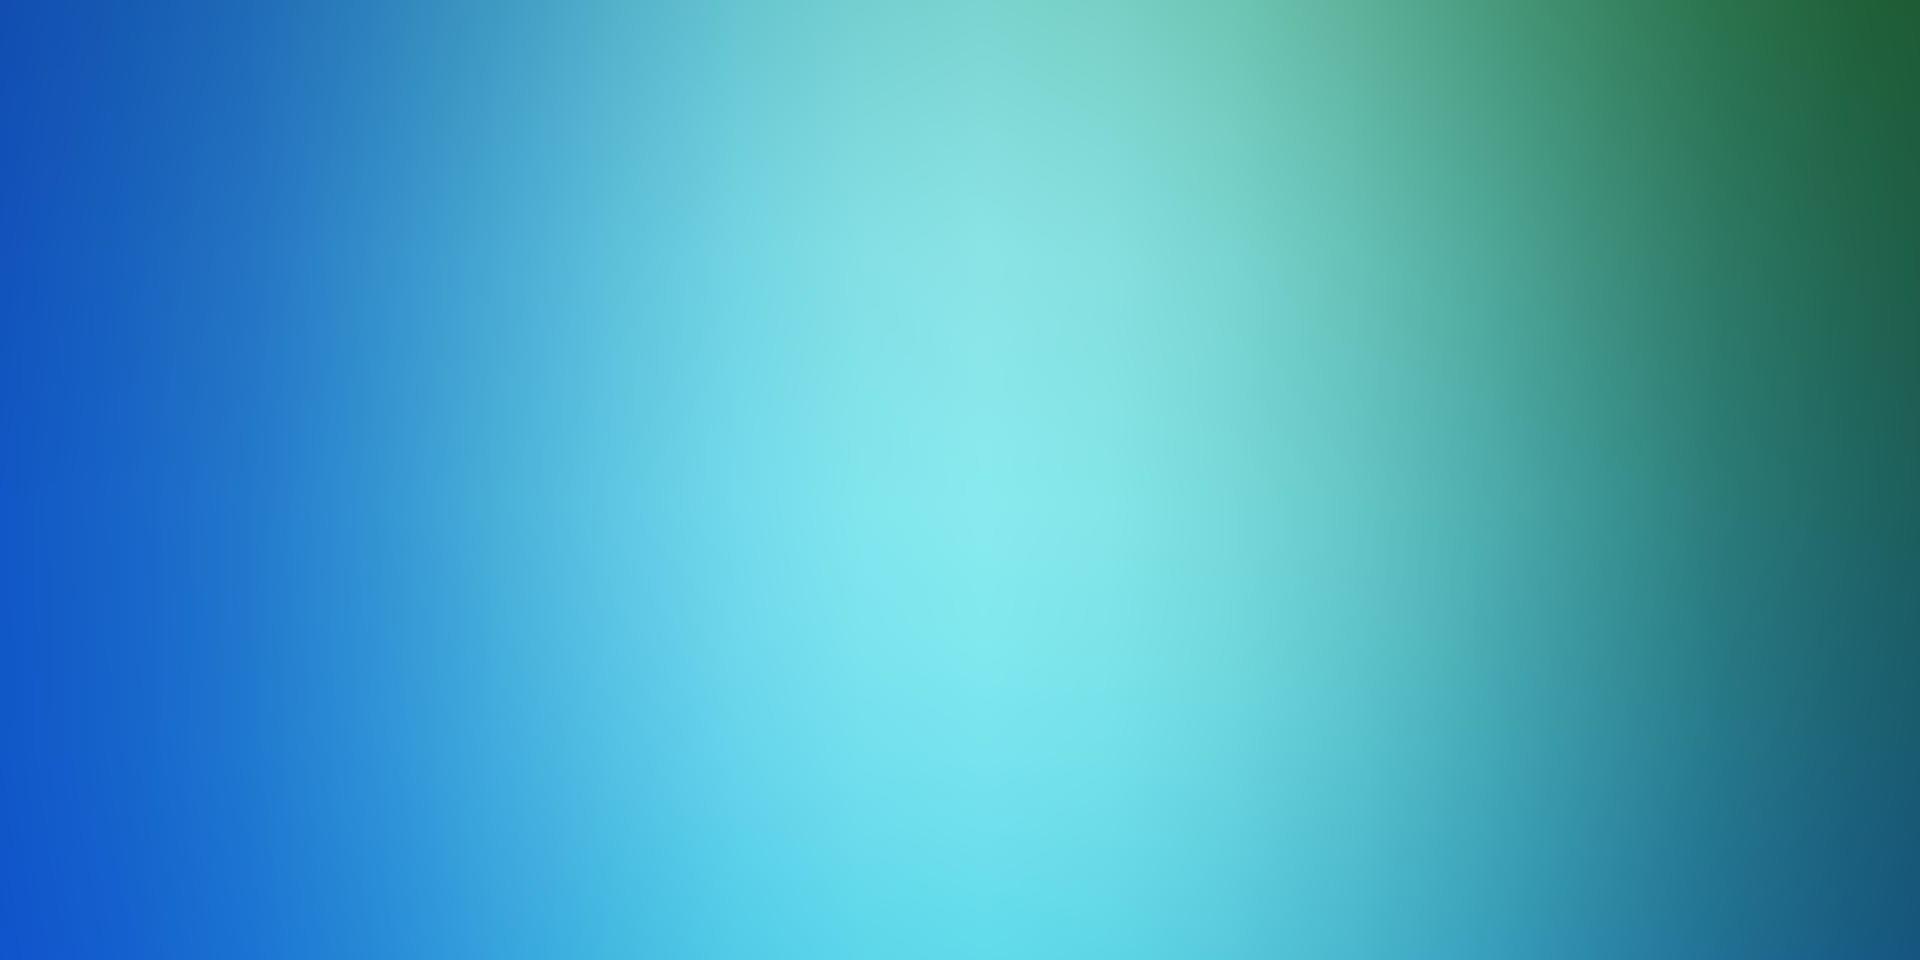 Light Blue, Green vector blurred colorful template.